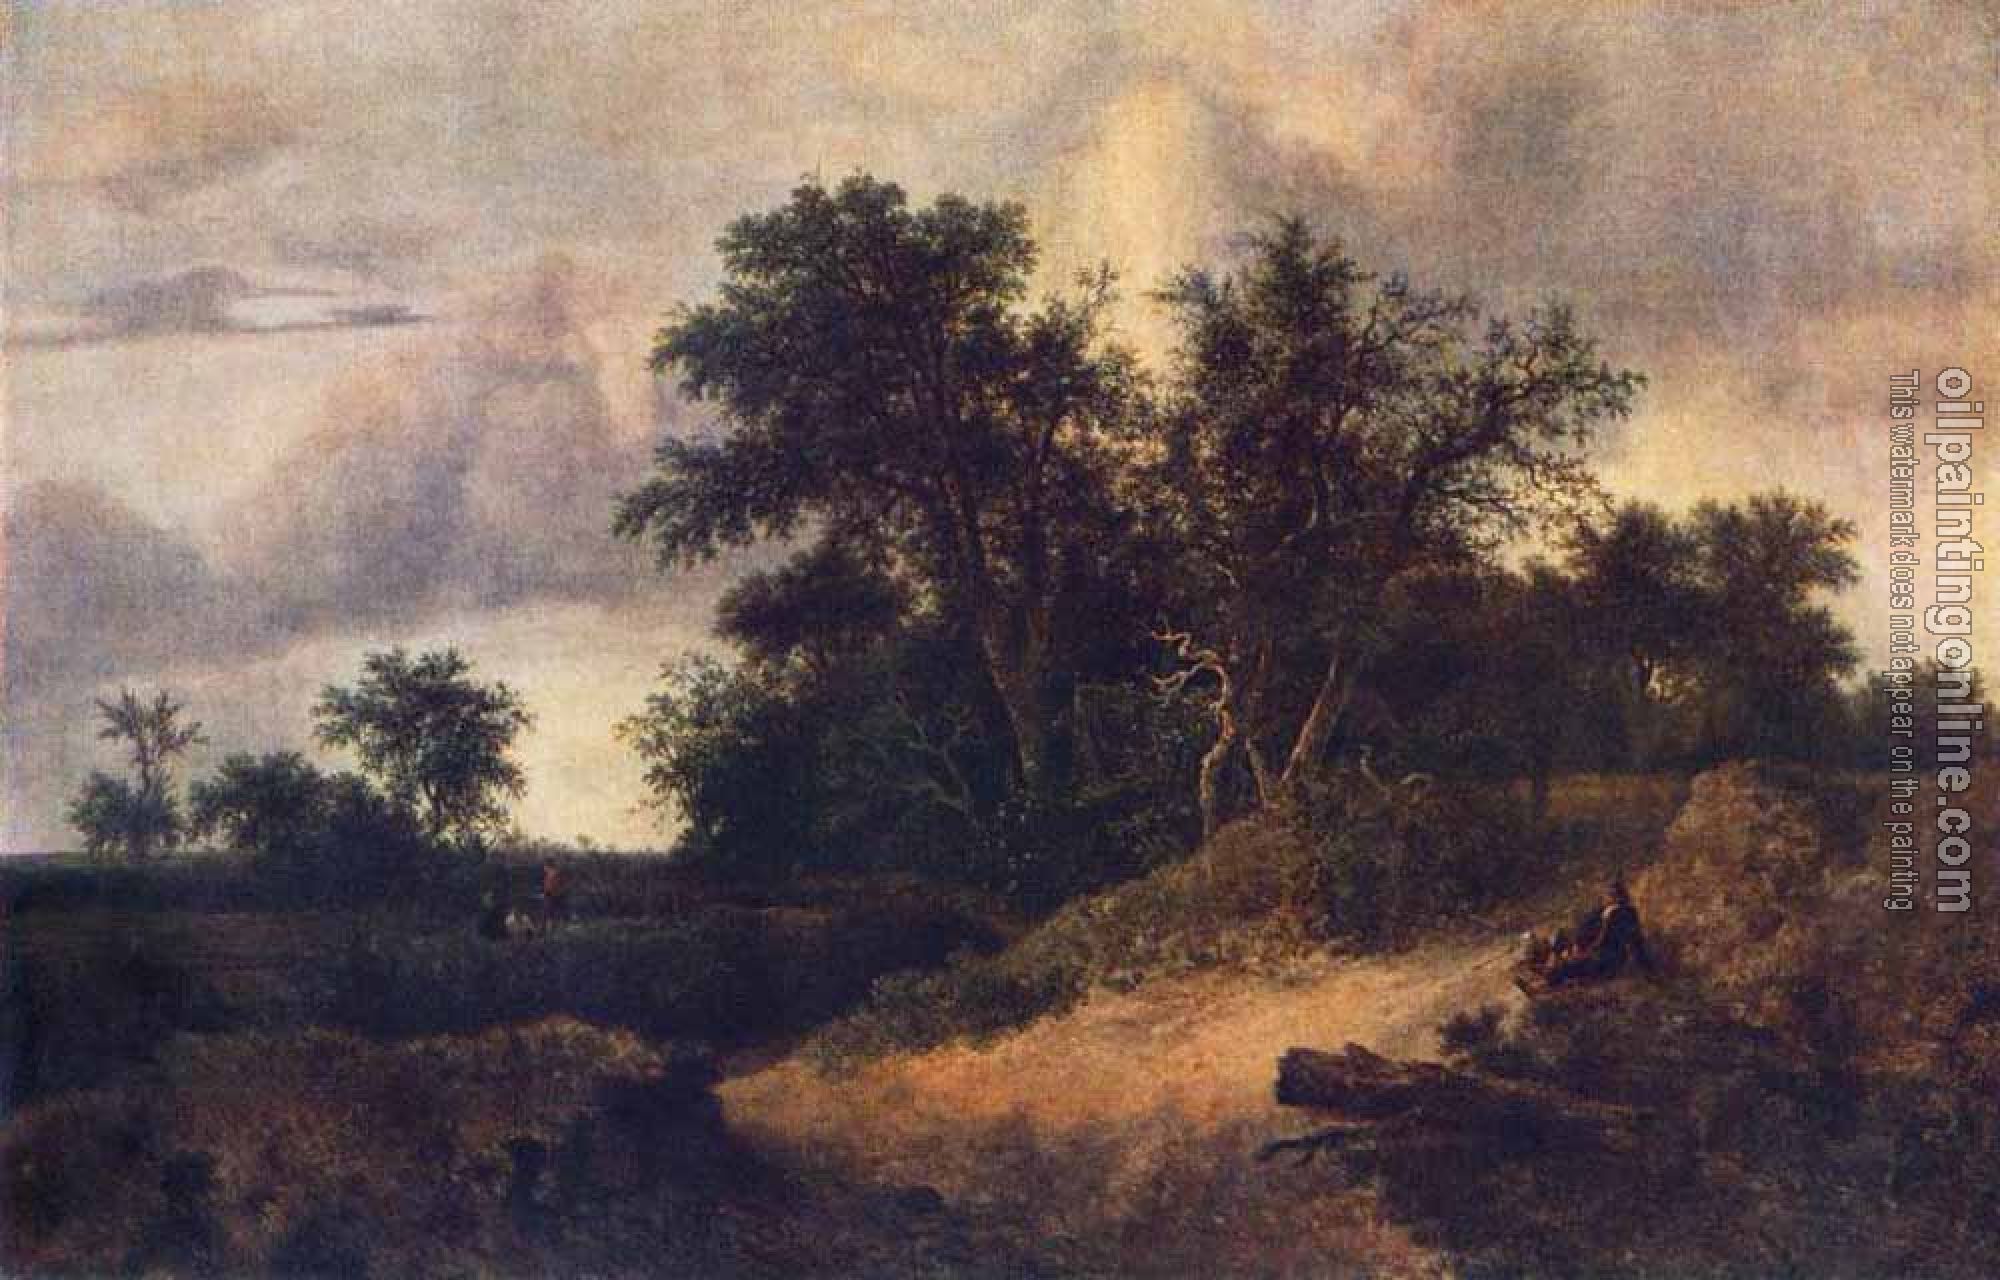 Jacob van Ruisdael - Landscape With A House In The Grove